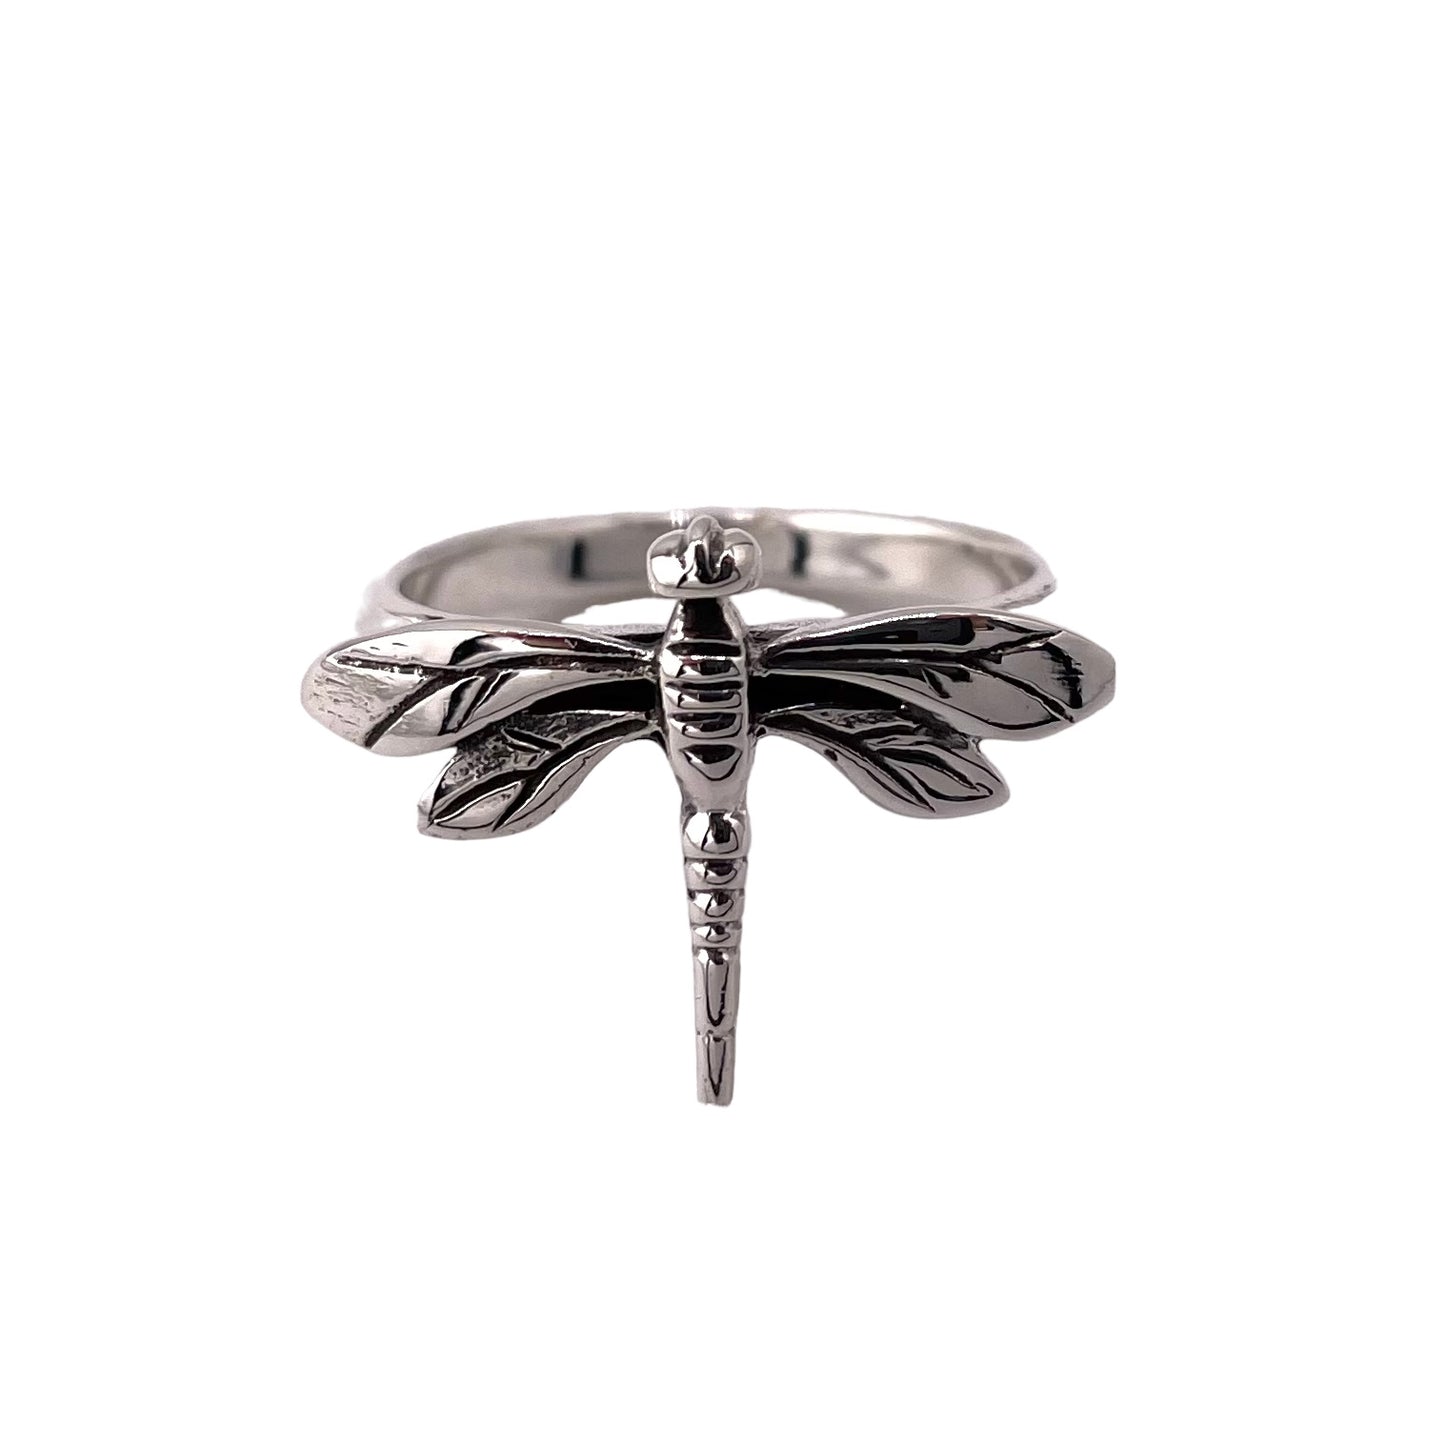 Dragonfly Ring Sterling Silver